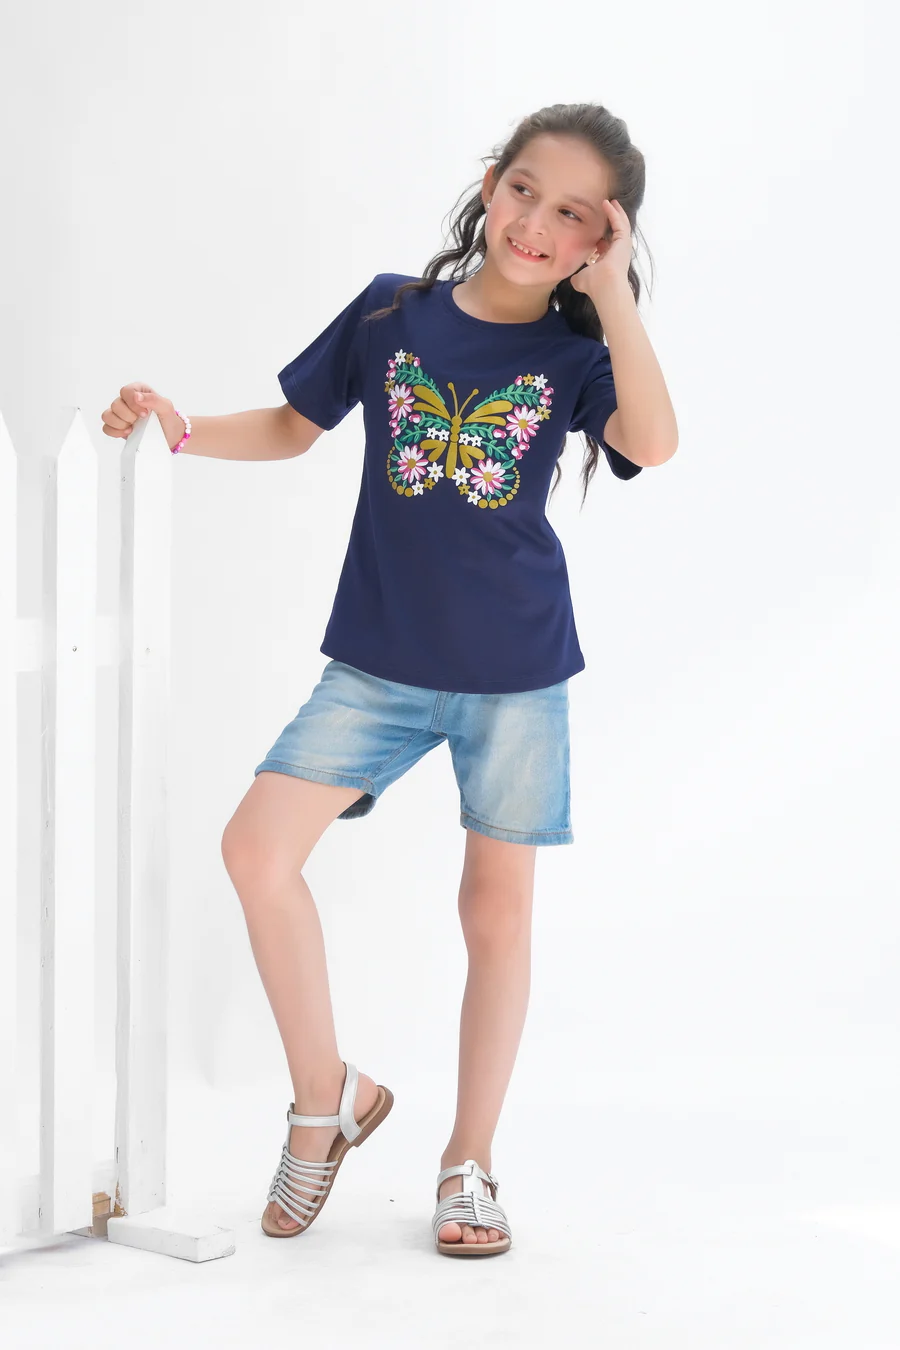 Flowers Pattern Butterfly Half Sleeves T-Shirts For Kids - Navy Blue